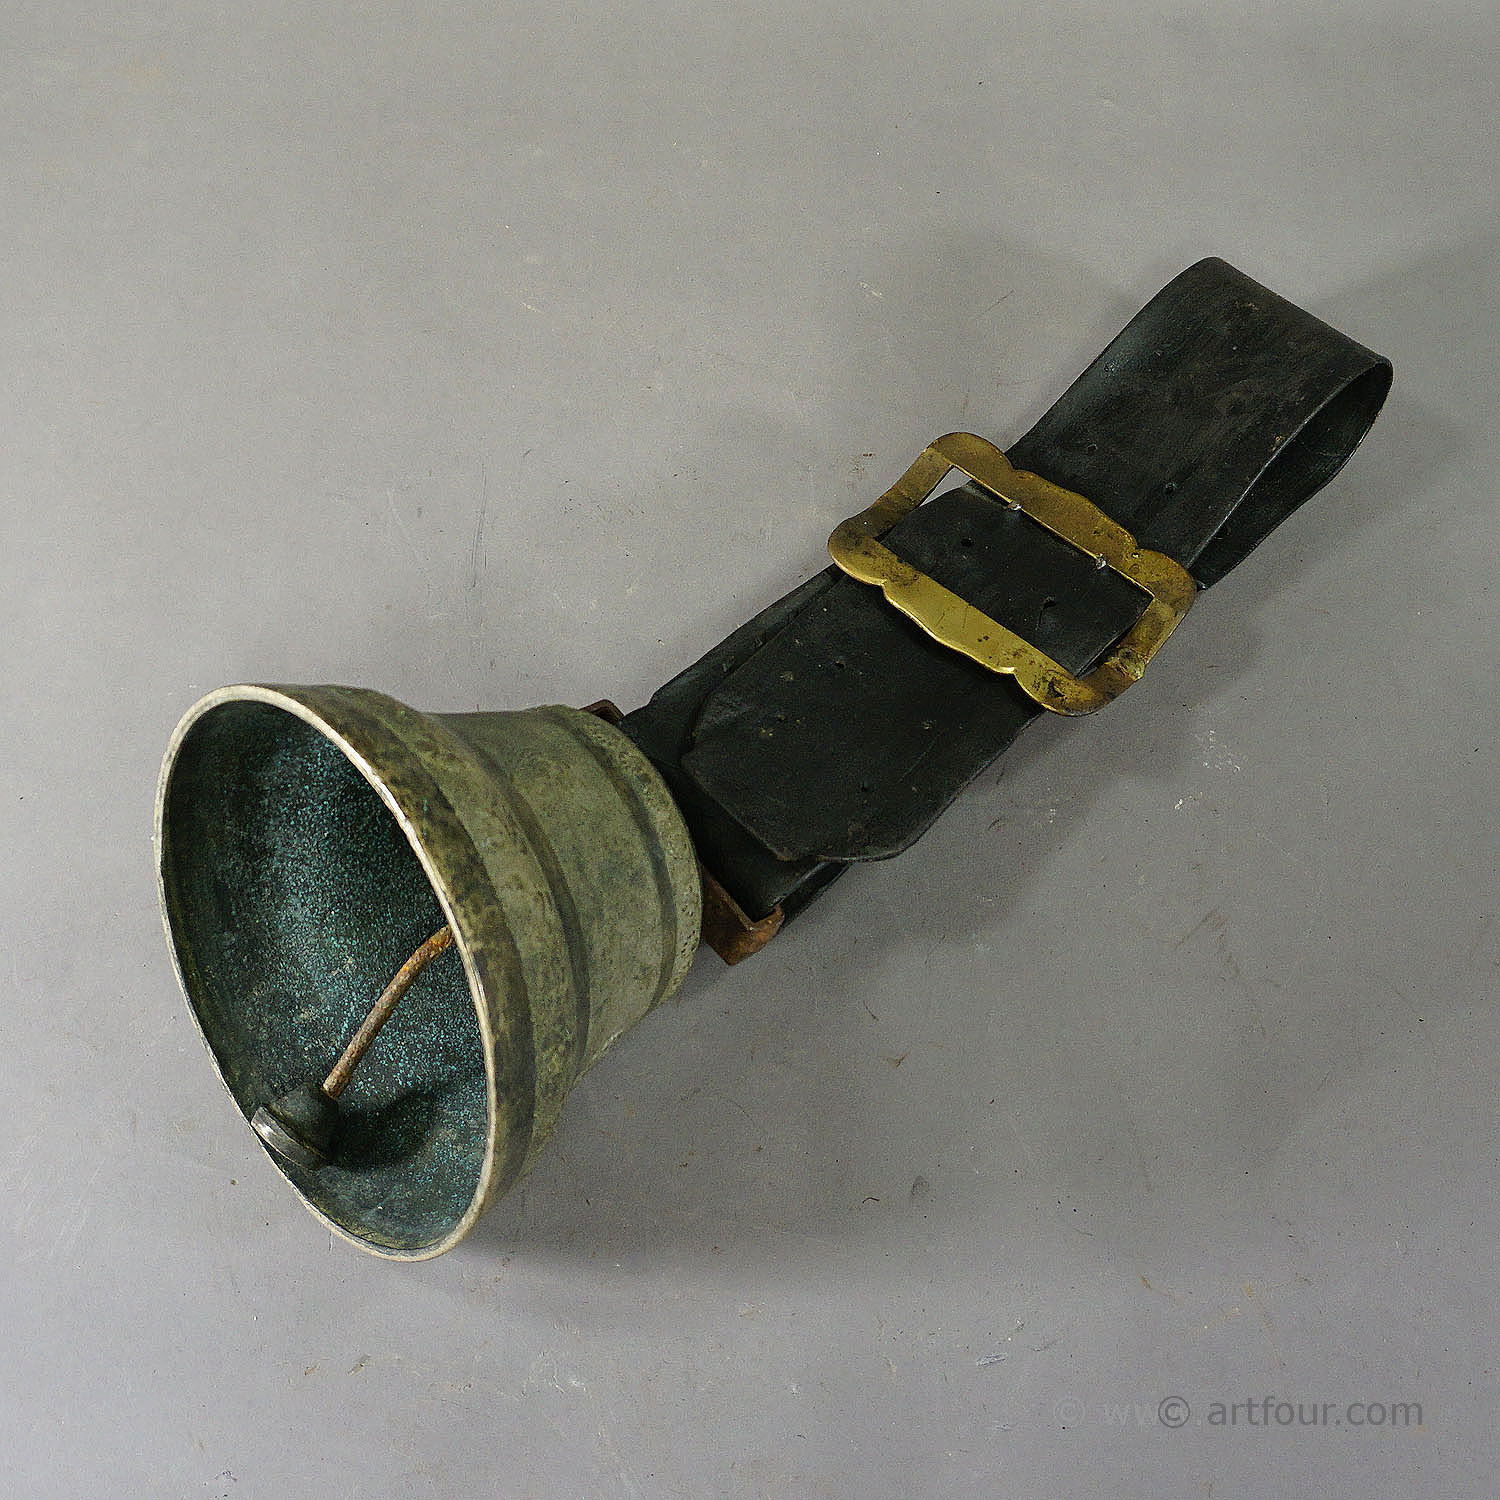 Antique Casted Bronze Cow Bell Made in Switzerland ca. 1930